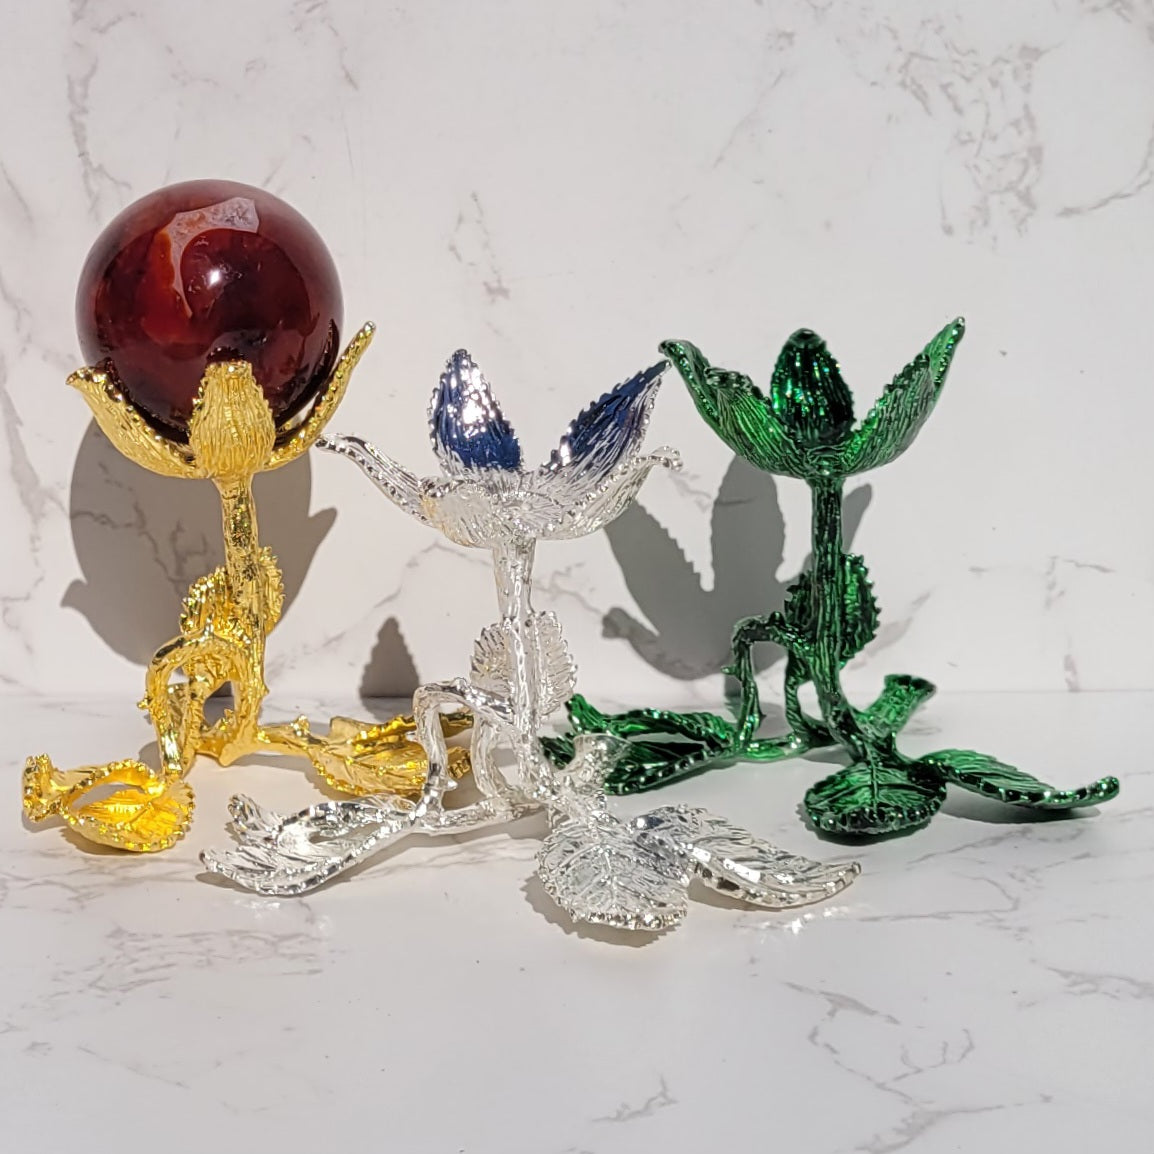 Metal Flower Sphere Display Stands in Gold, Silver or Green, for Crystal Balls 1.5" to 3.2"